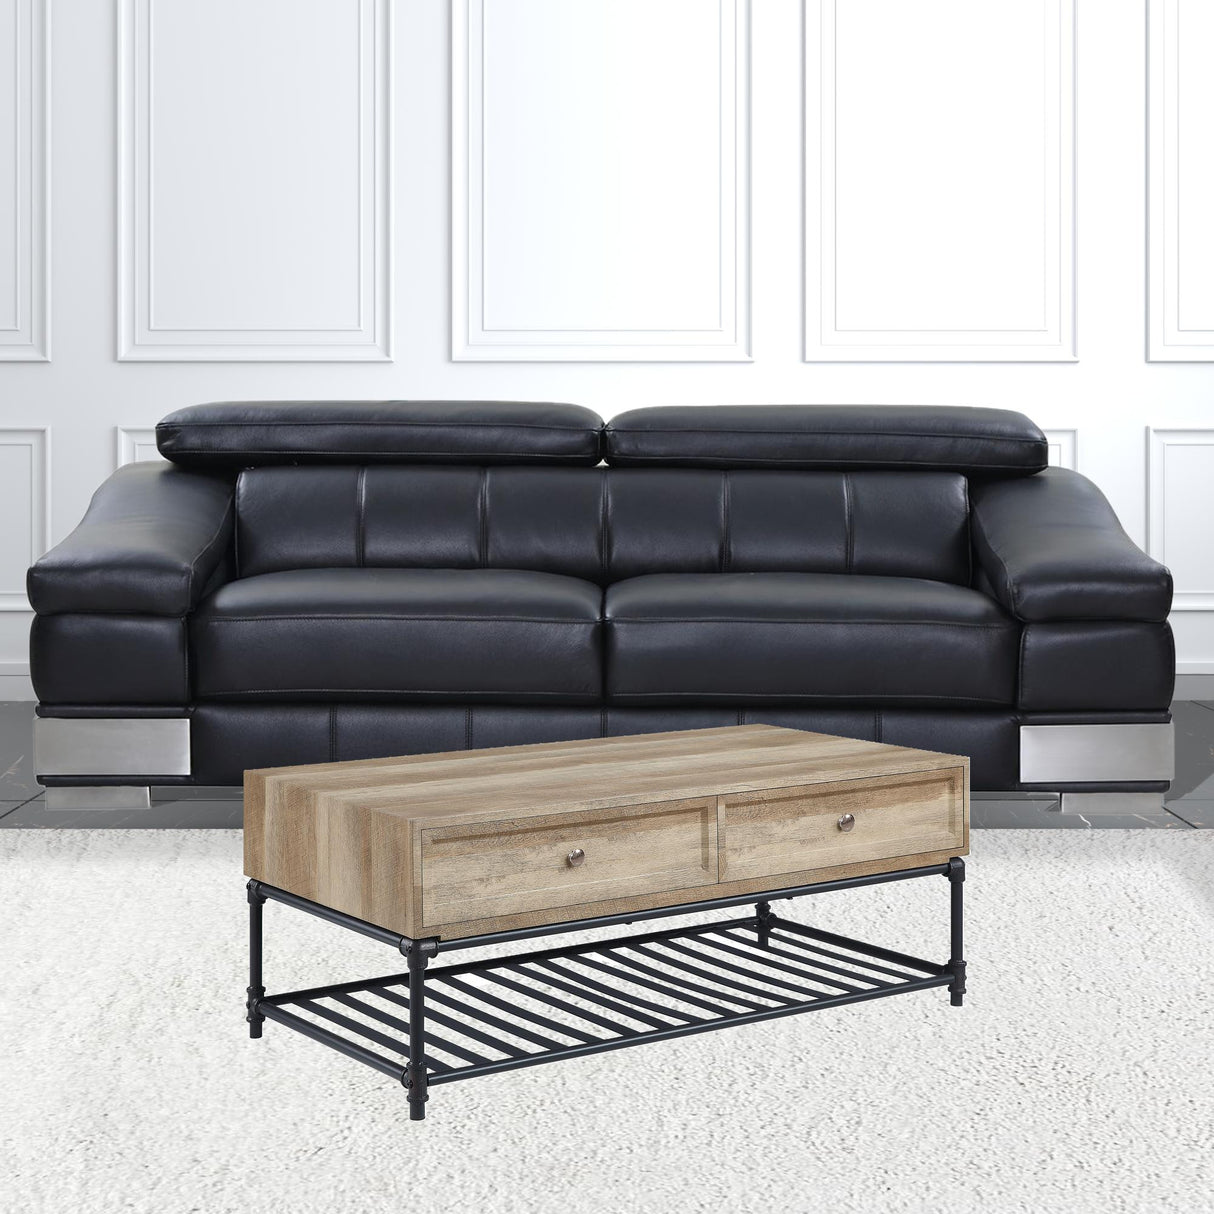 47" Sandy Black And Oak Paper Veneer And Metal Rectangular Coffee Table With Two Drawers And Shelf